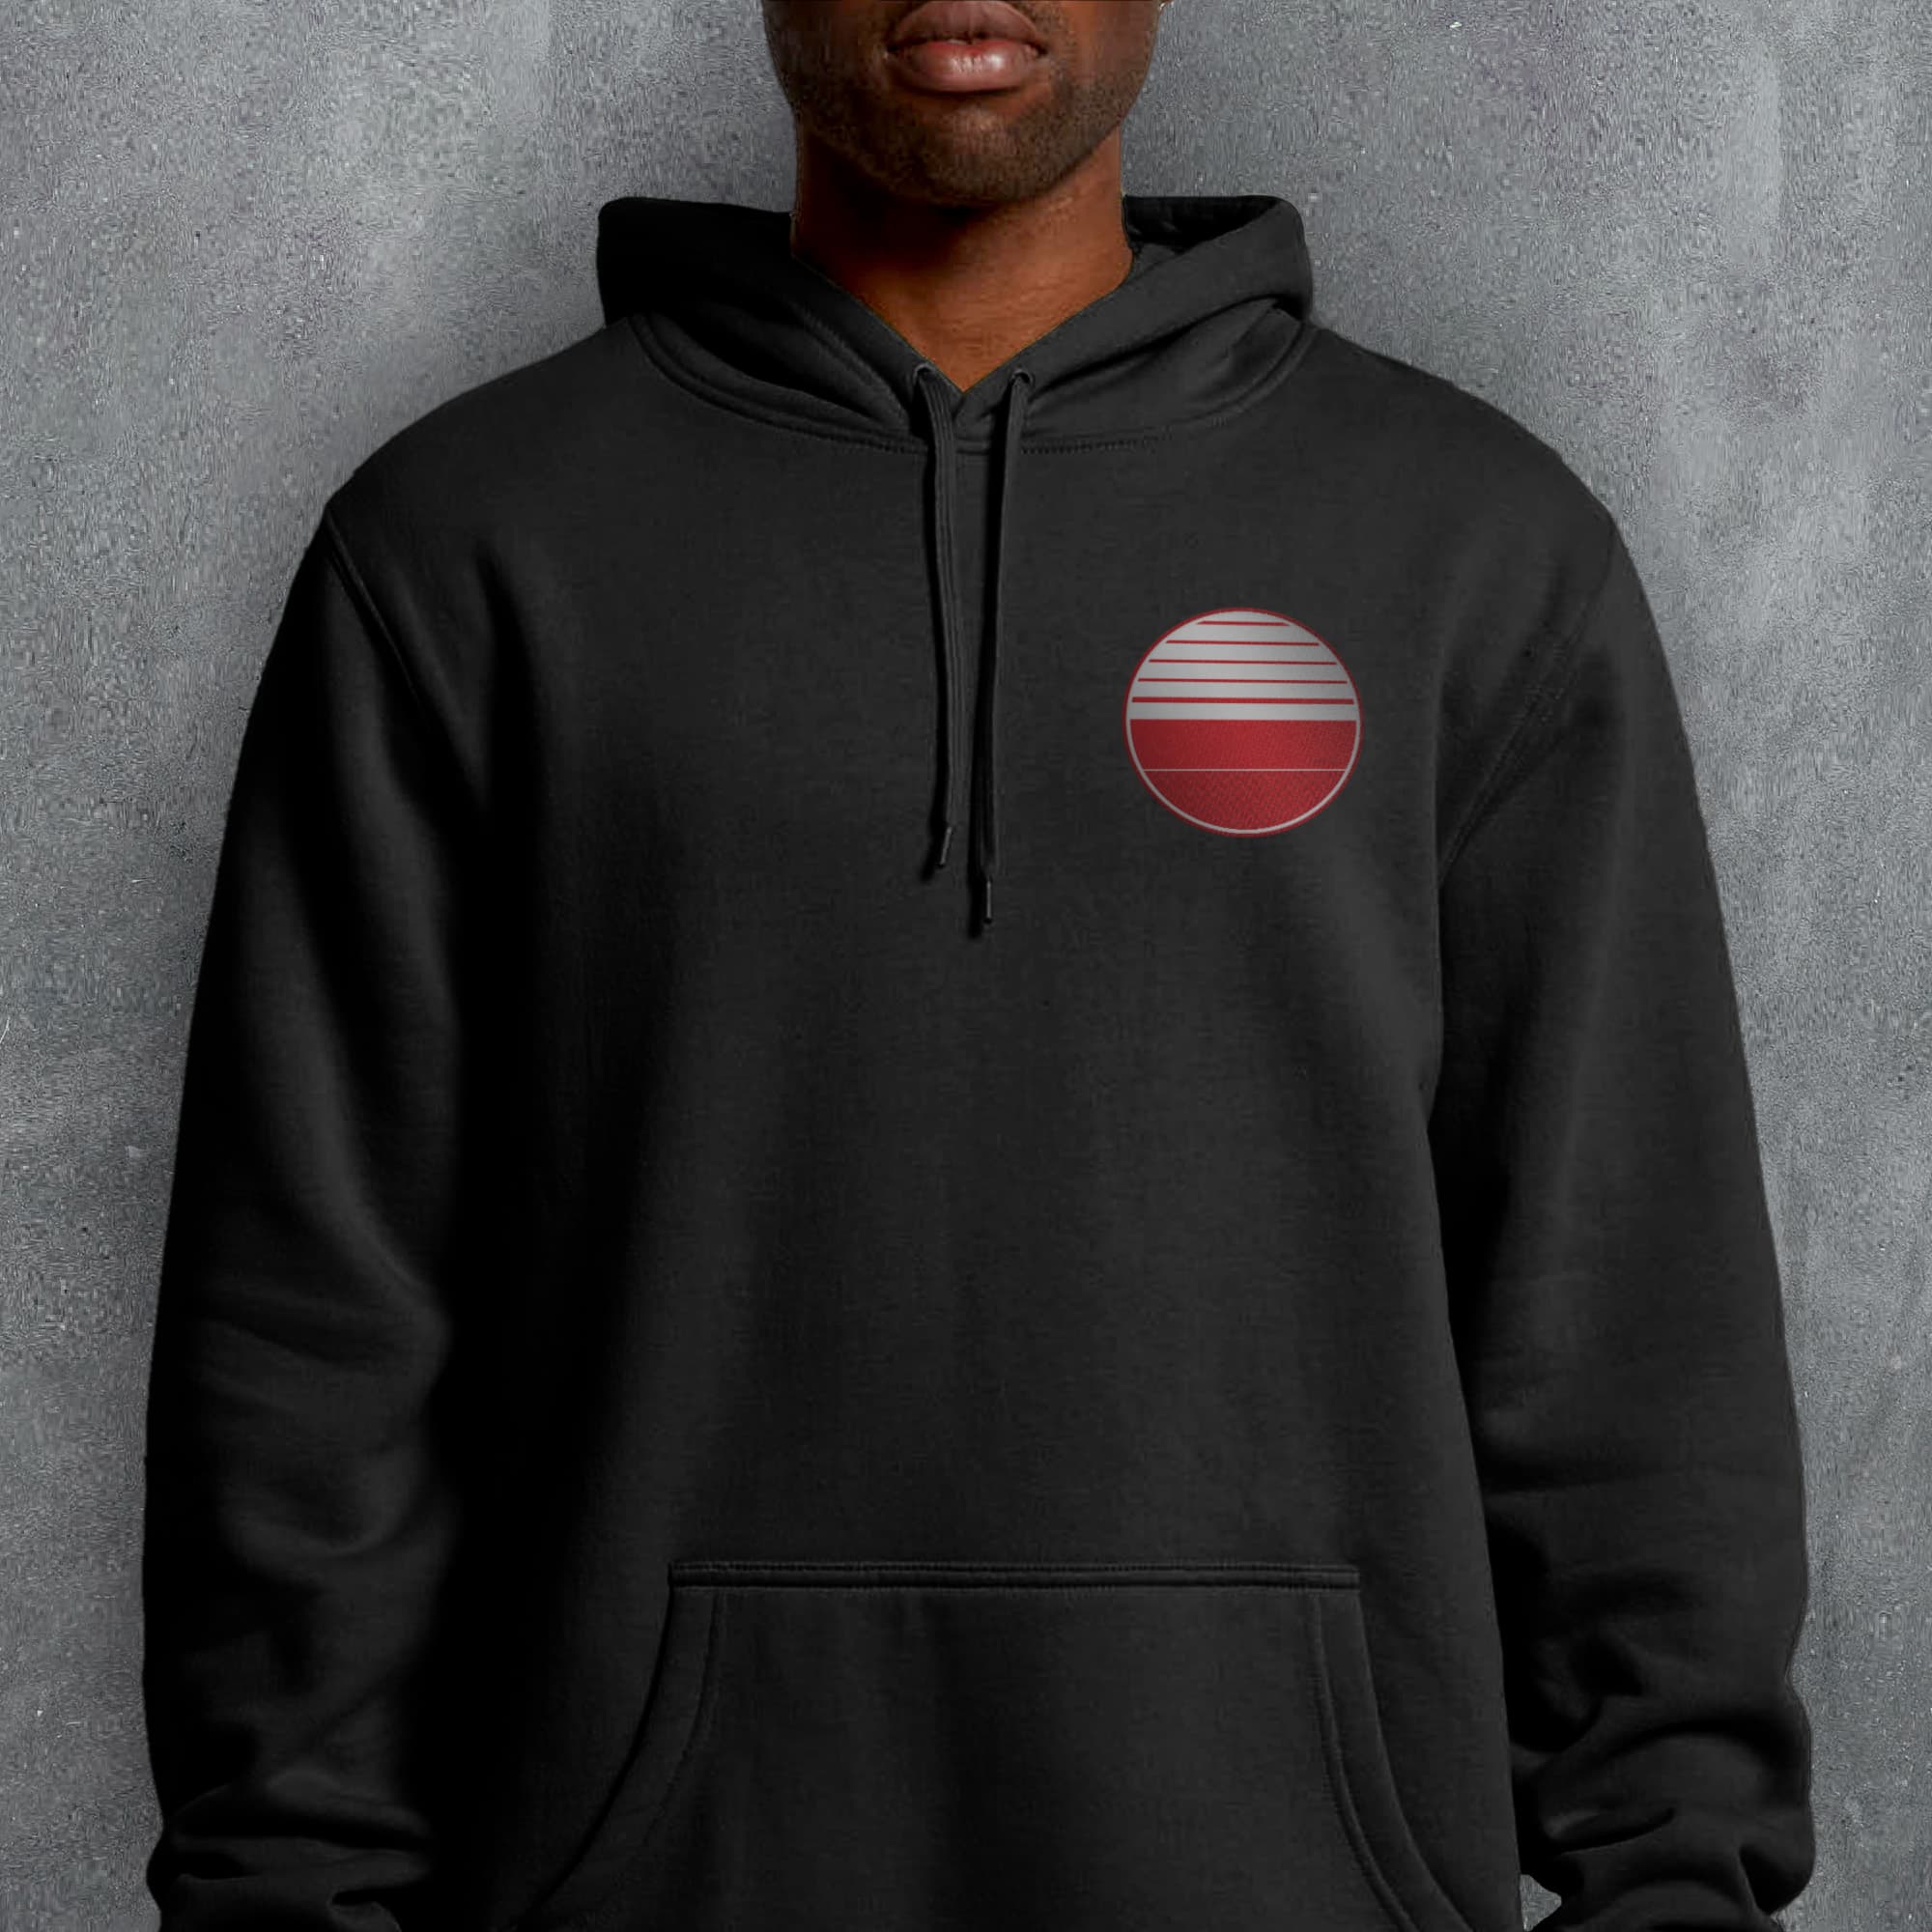 a man wearing a black hoodie with a red circle on it